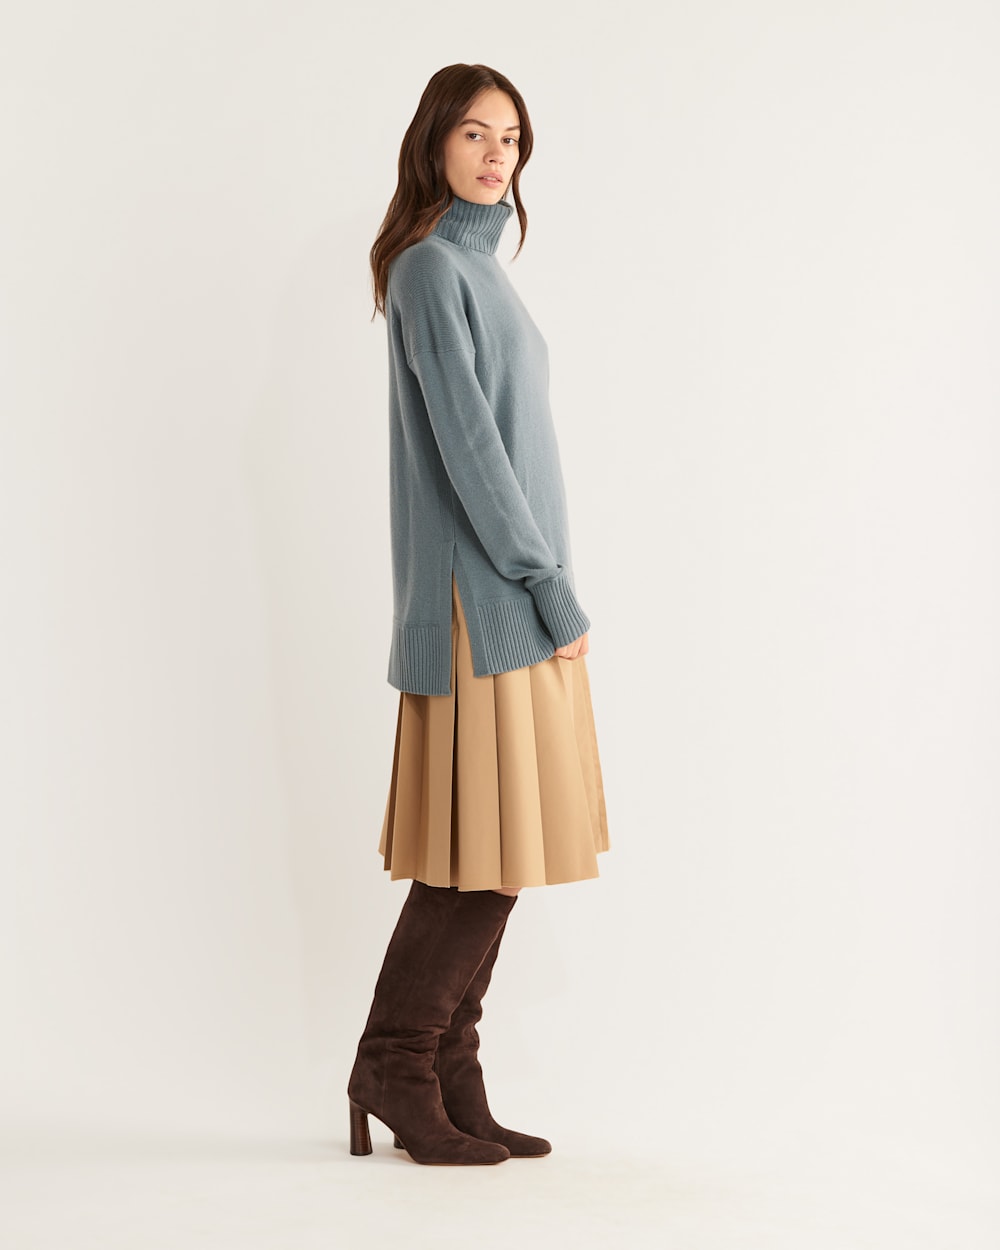 ALTERNATE VIEW OF WOMEN'S MERINO/CASHMERE OVERSIZED TURTLENECK IN SHALE BLUE image number 2